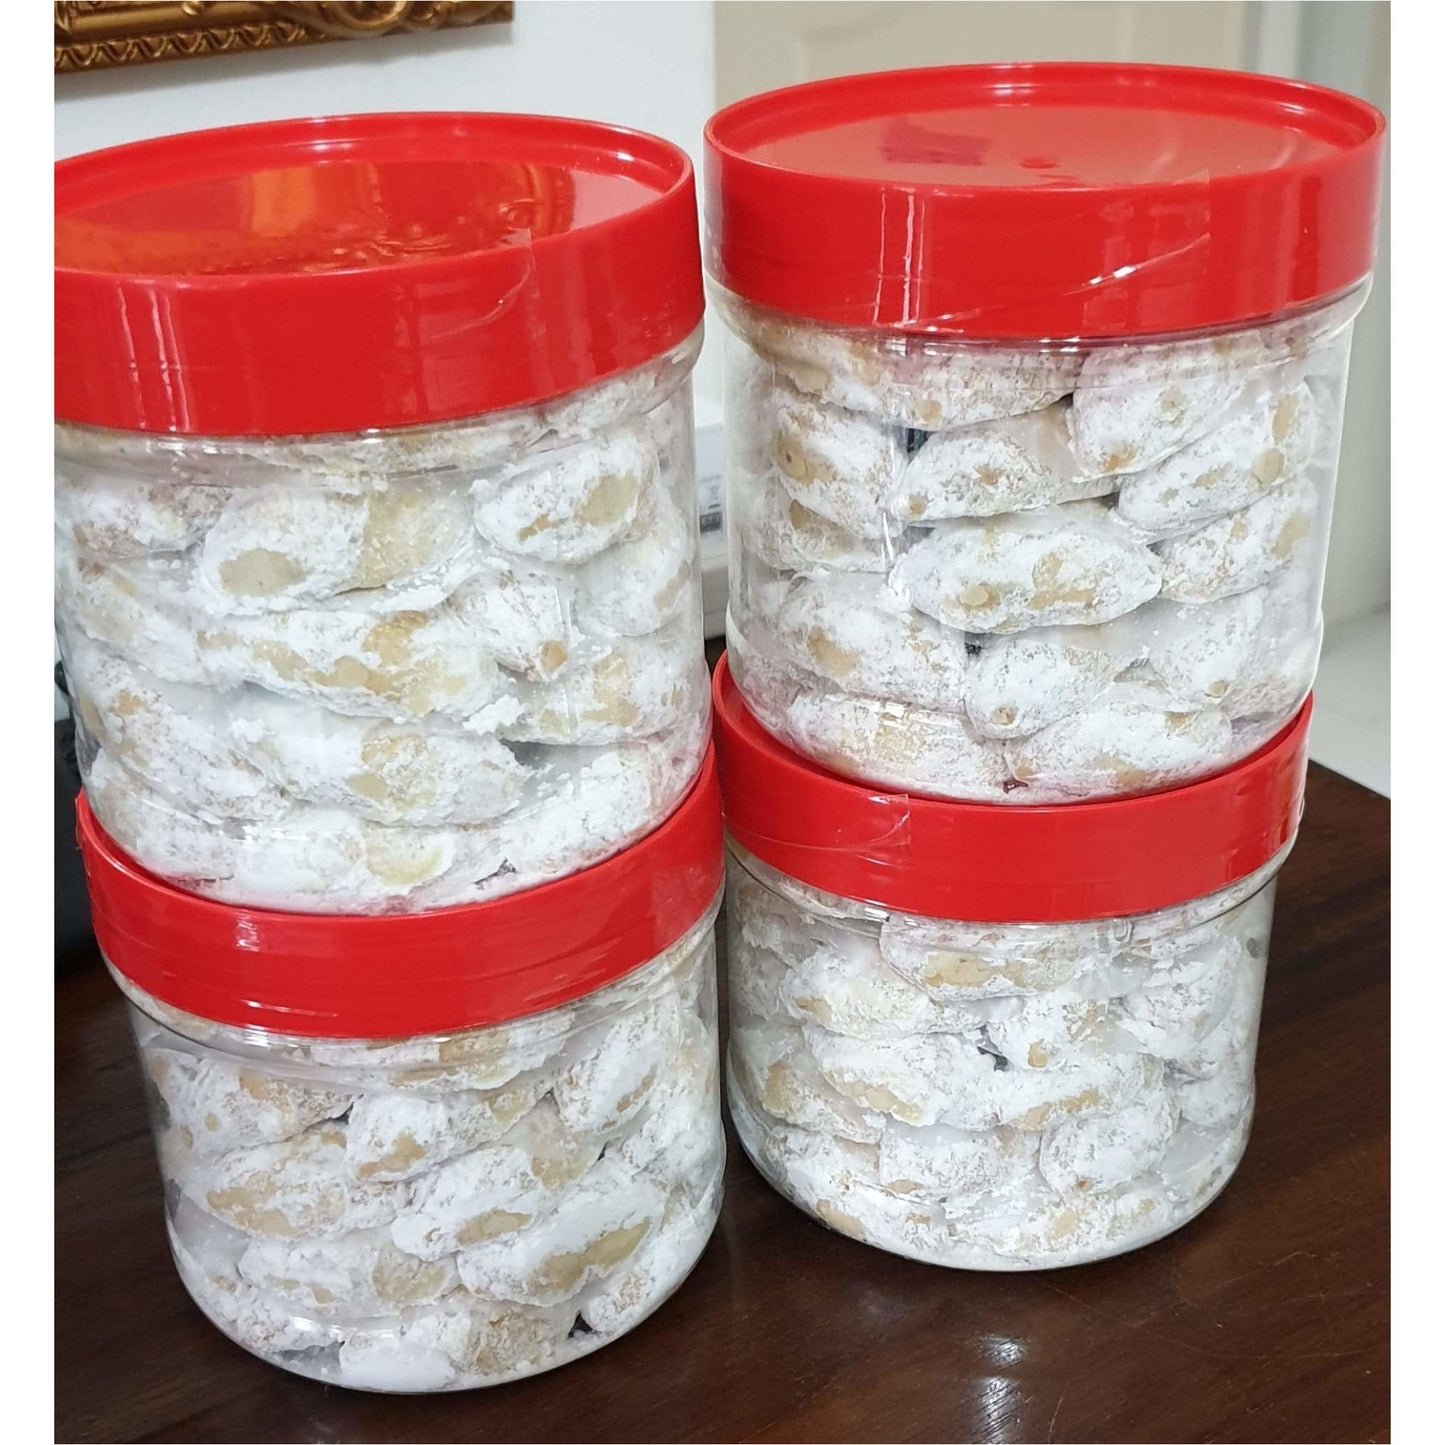 Traditional Makmur (Kacang) / 50pcs (Traditional Filled Crushed Toasted Peanut Cookies)  |||  Pre Order